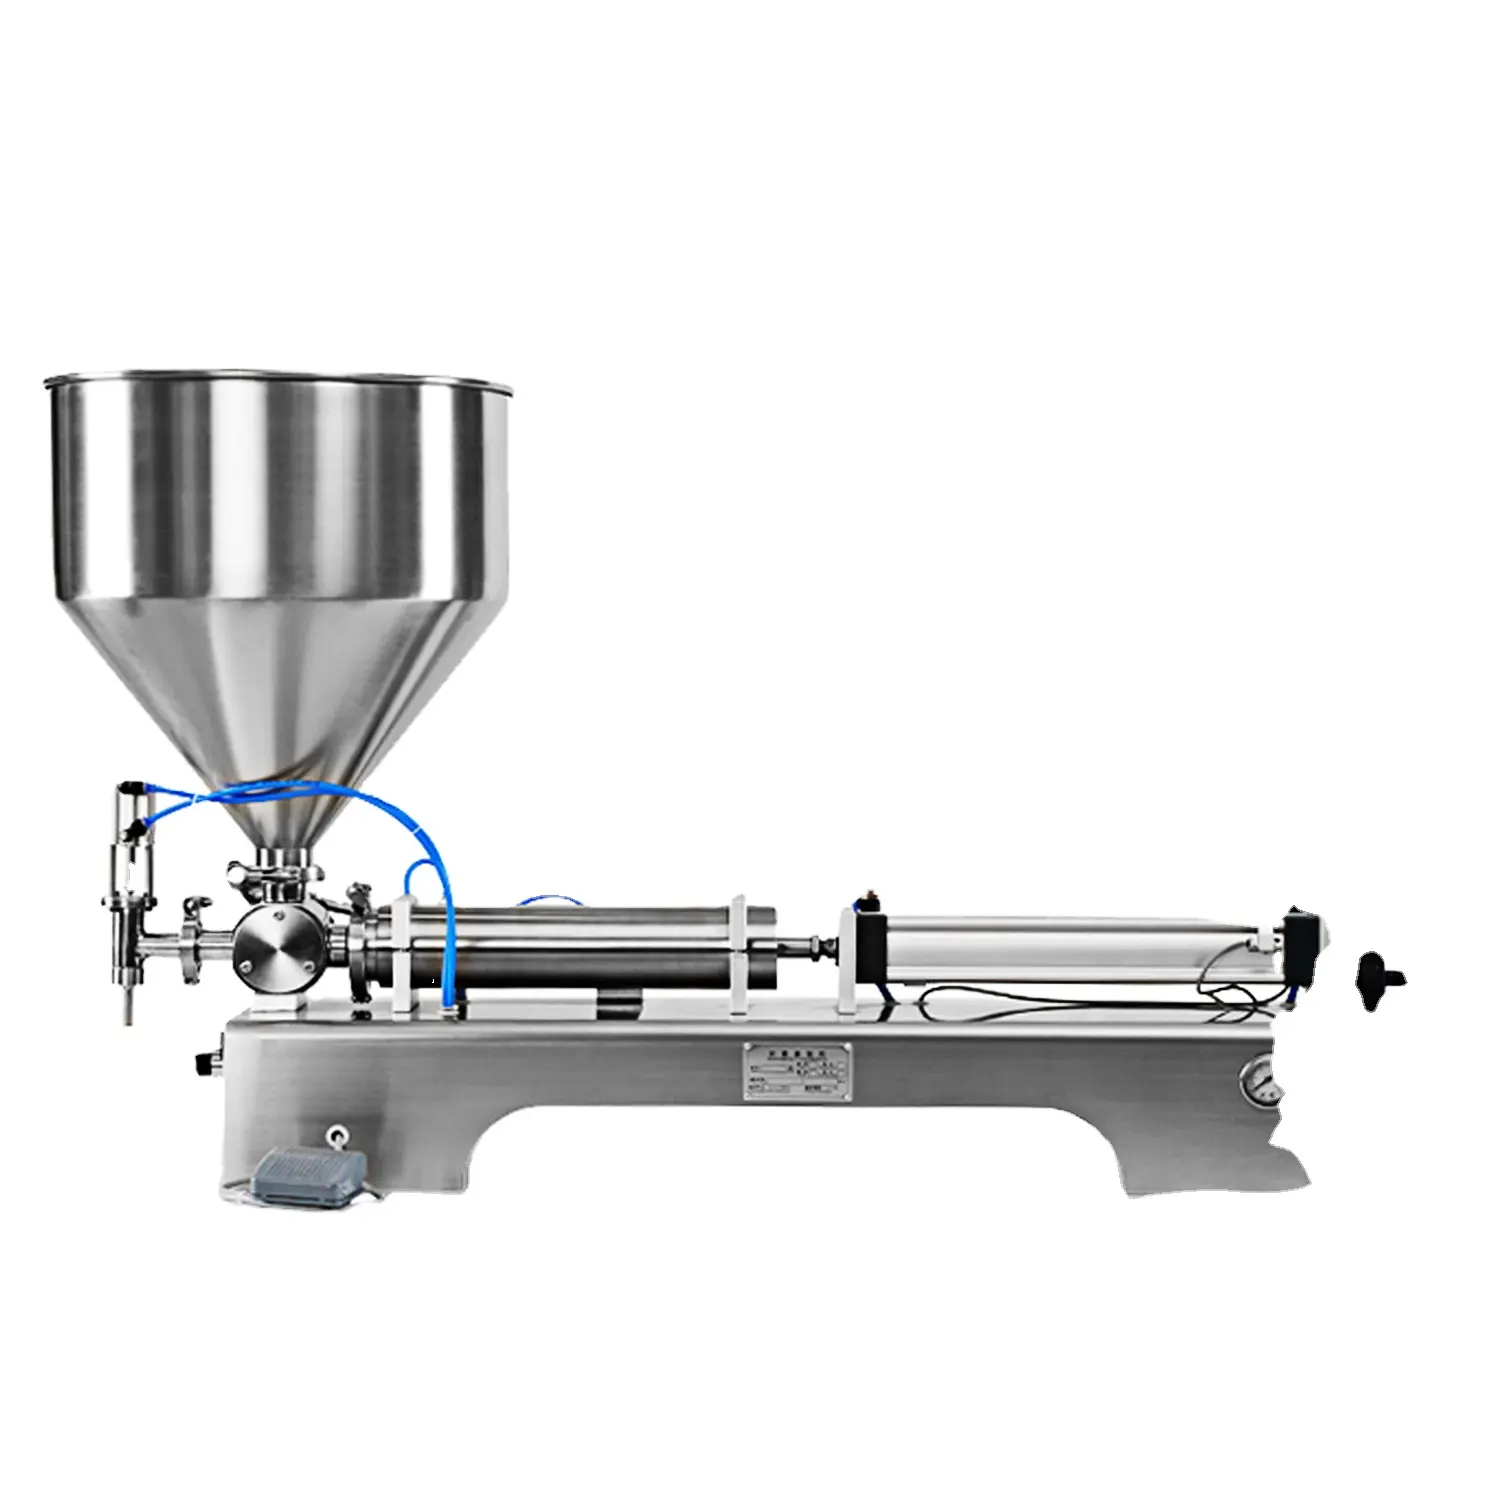 Stainless steel hopper semi automatic filling machine multiple range manually filling paste honey with high accuracy